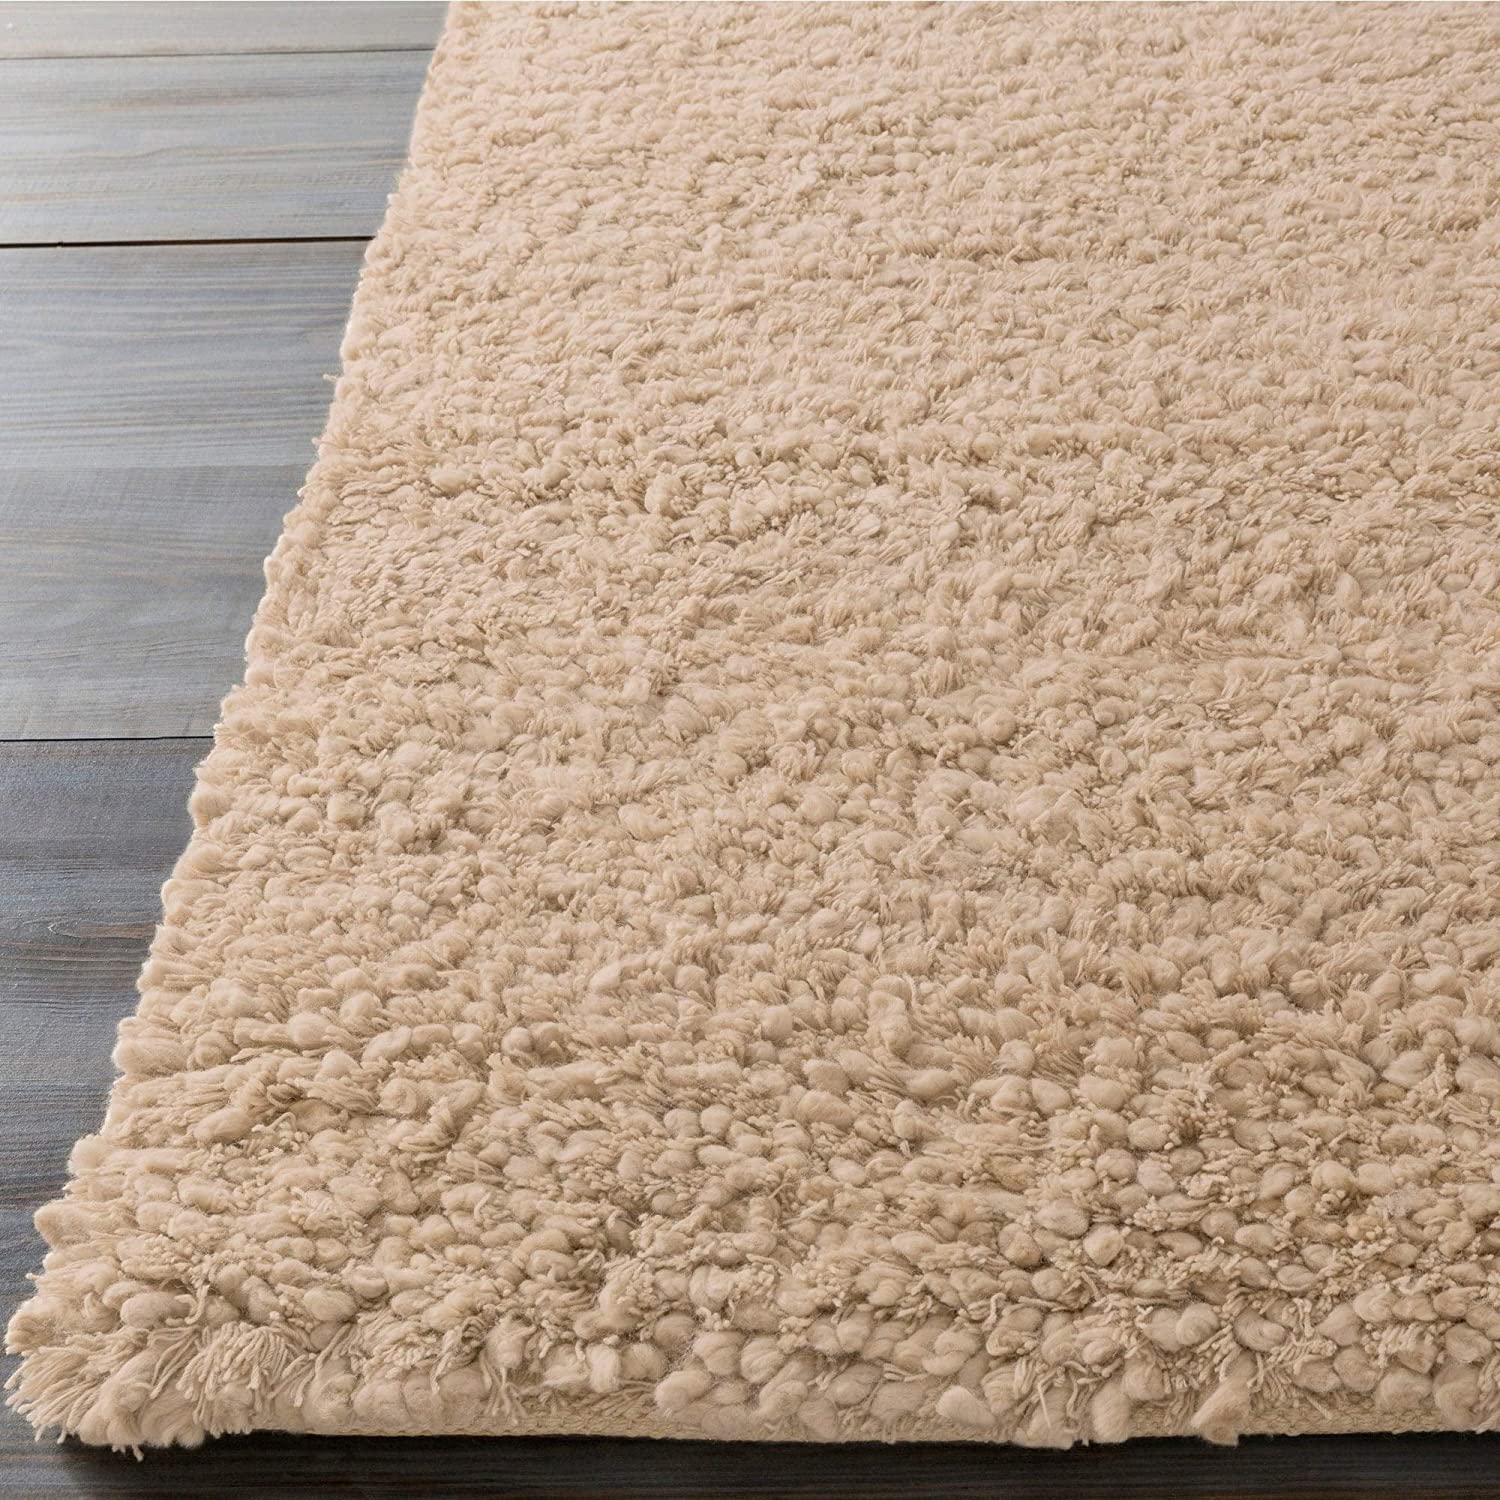 Hand Woven Beige New Zealand Wool Plush Shag Area Rug 3'6" X 5'6" Brown Solid Modern Contemporary Rectangle Latex Free Handmade